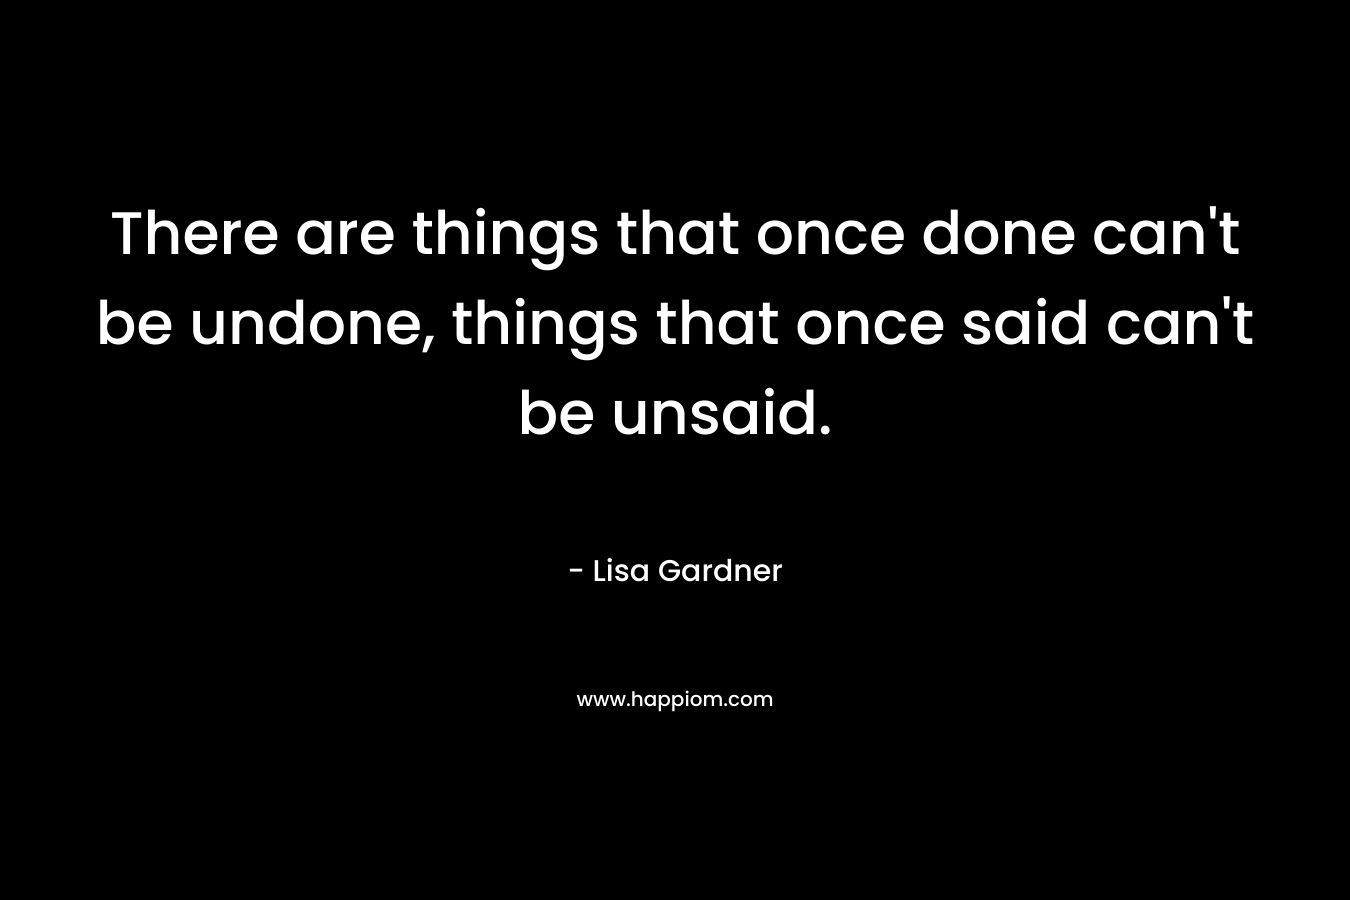 There are things that once done can’t be undone, things that once said can’t be unsaid. – Lisa Gardner